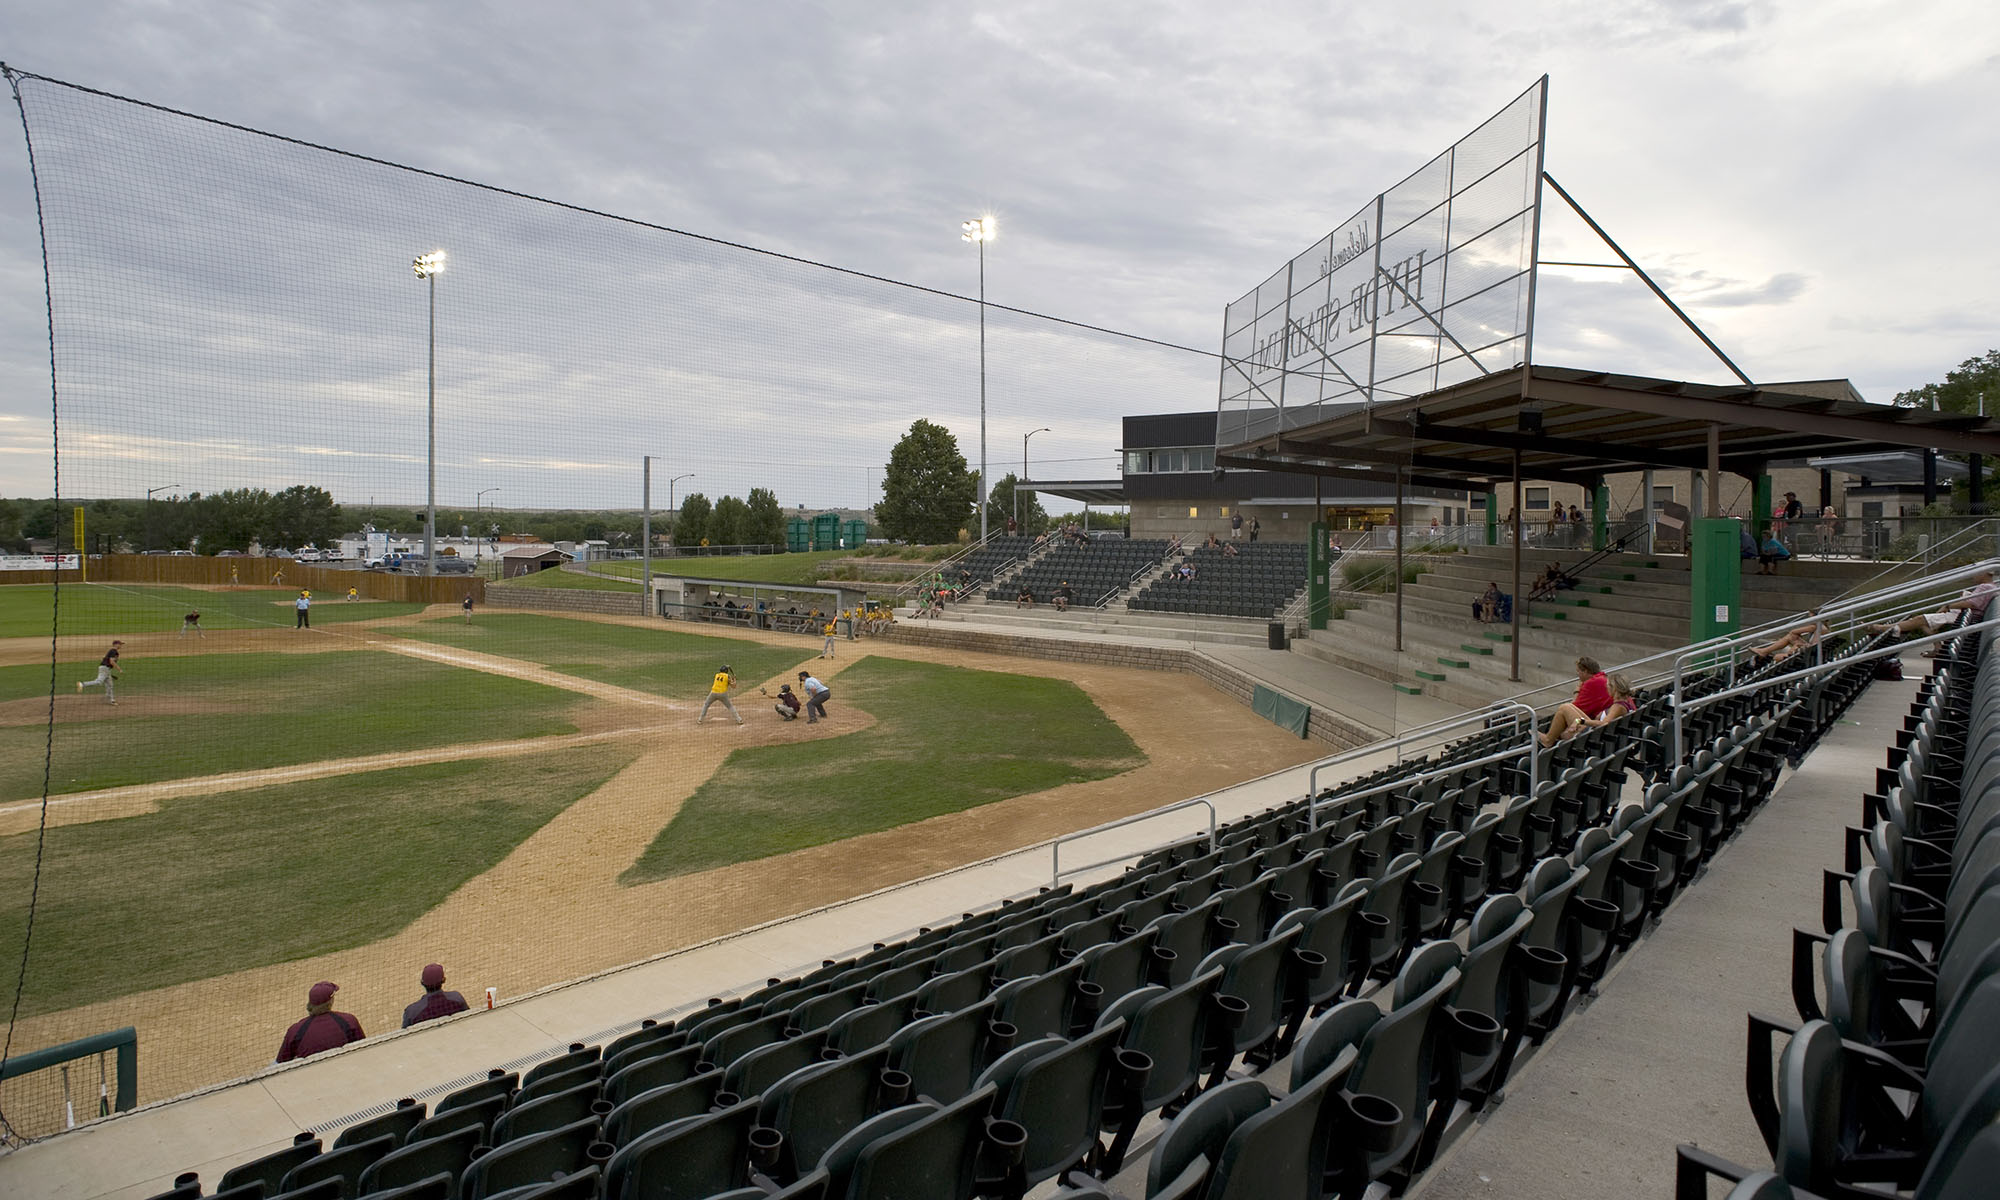 Hyde Stadium, Pierre, S.D., Ciavarella Design, photos by Cipher Imaging (Architecture category entry)